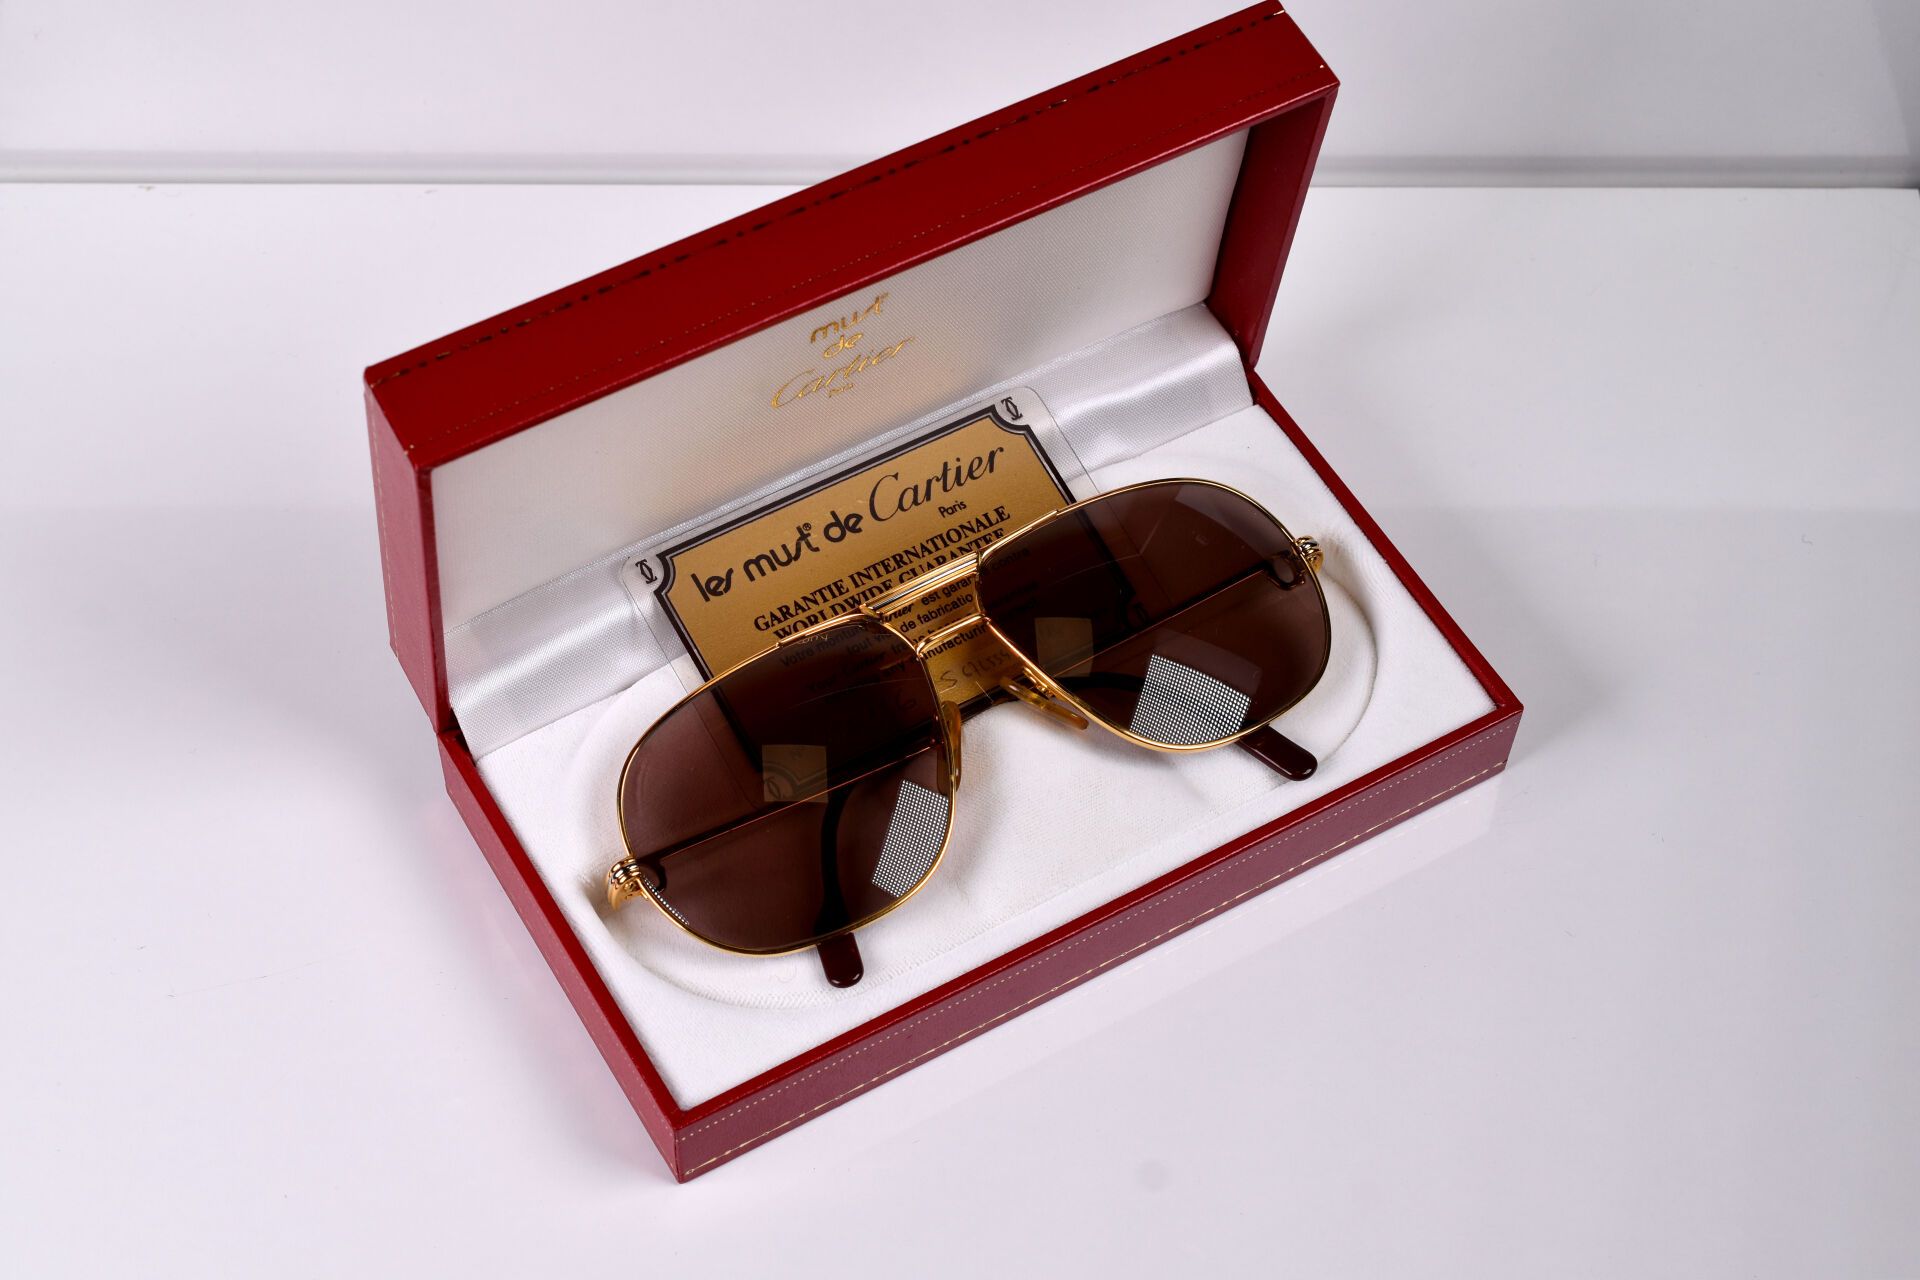 Null MUST DE CARTIER. Smoked glass pilot sunglasses. With box and card.